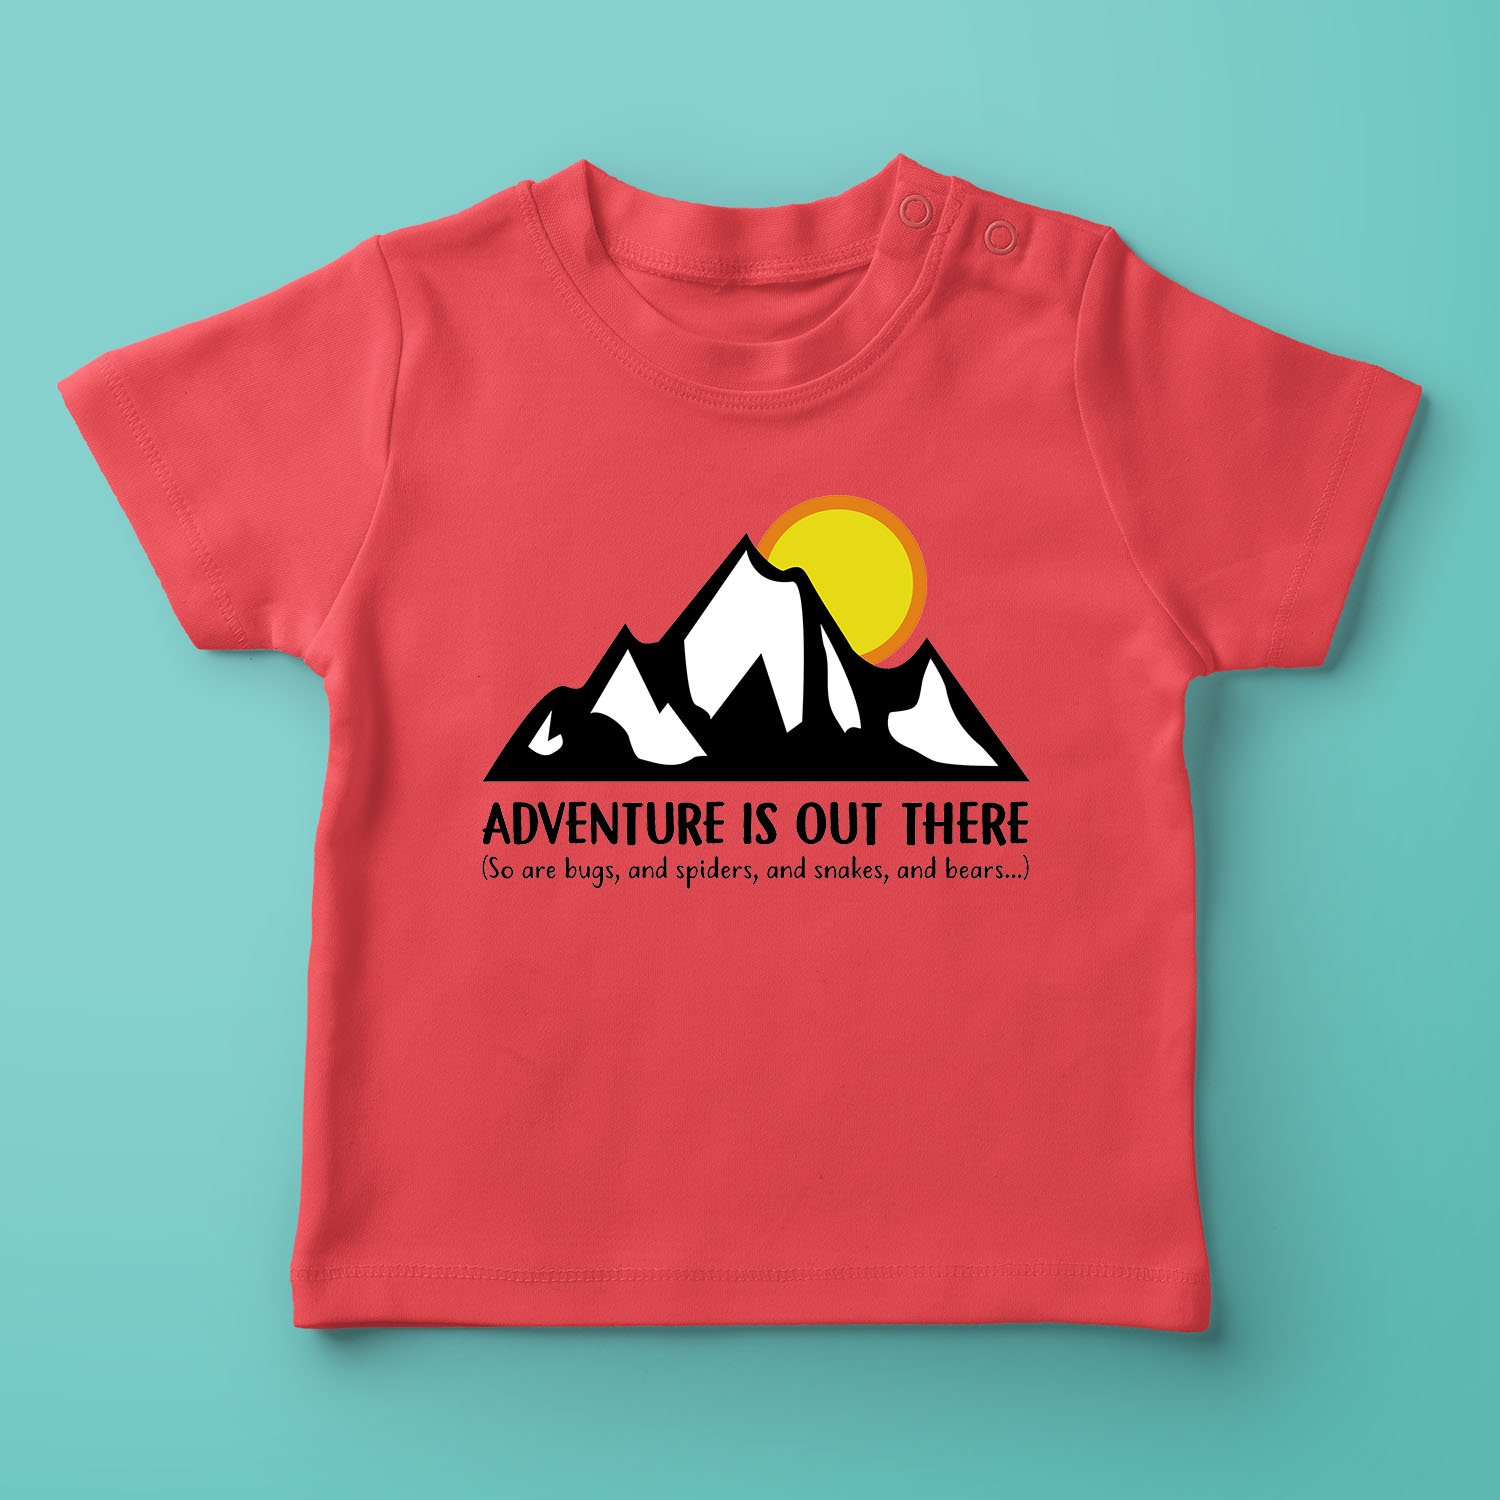 kids camping shirt made from svg file